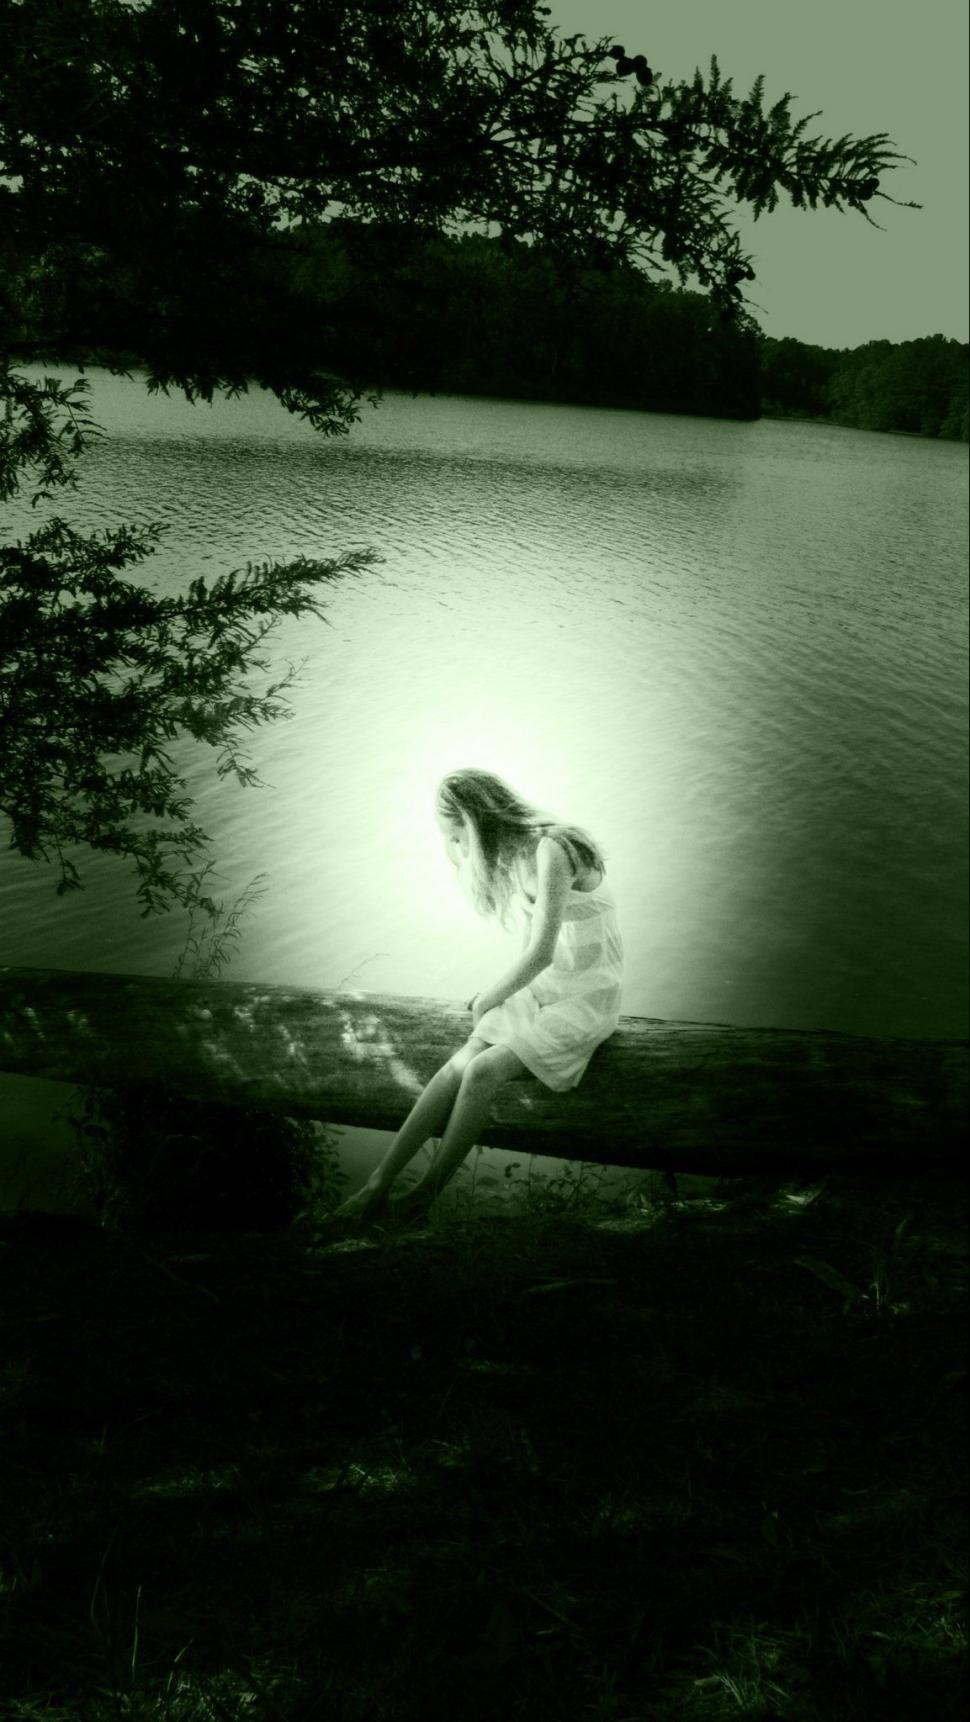 Free Image of Alone Woman With Lake and Trees  